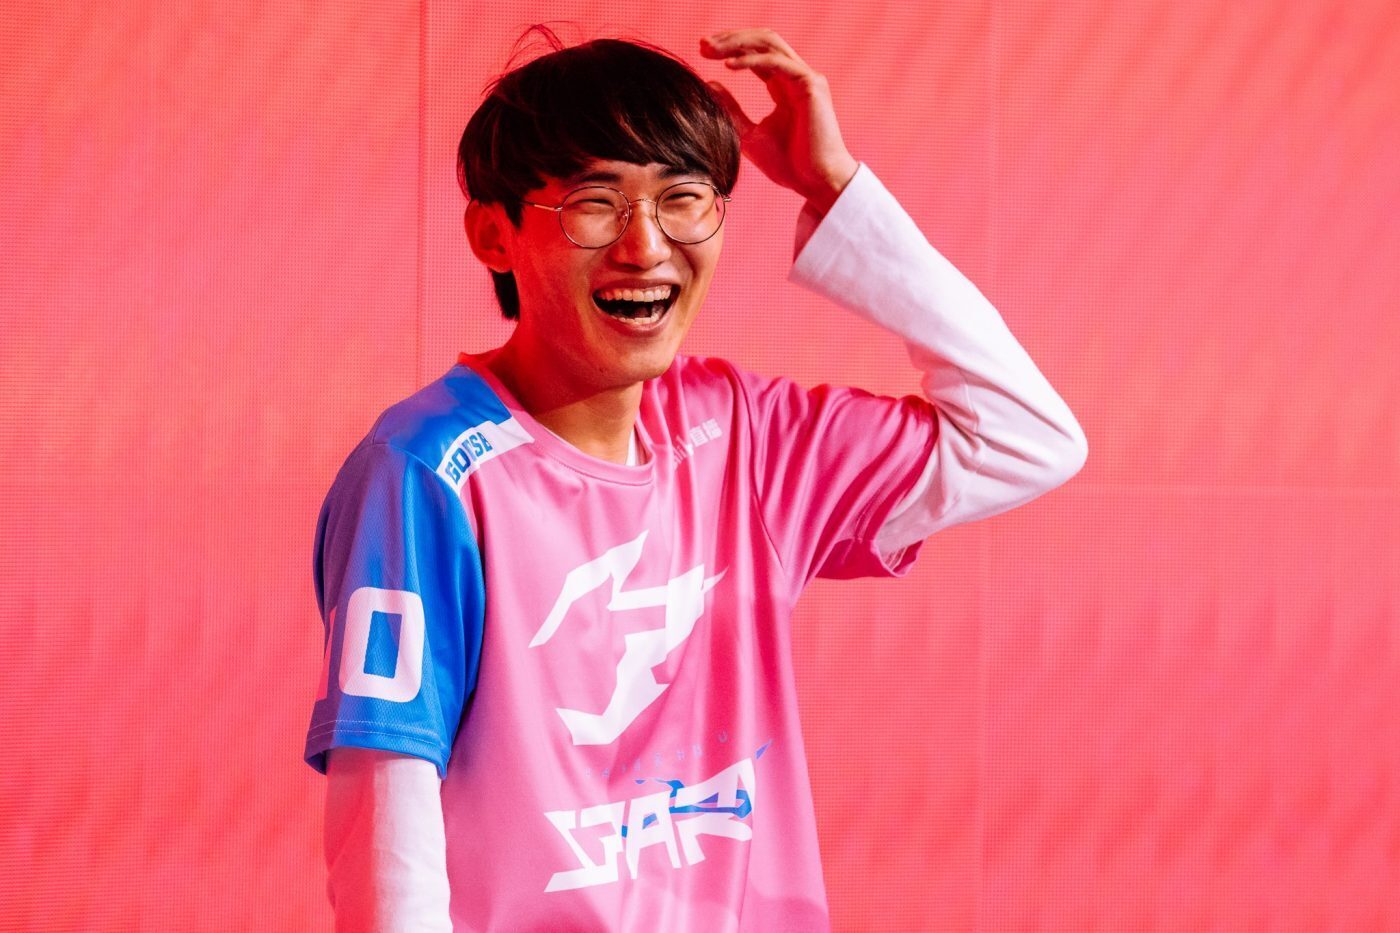 The Hangzhou Spark moved up from 13th place in Stage 1 to 7th in Stage 2. (Photo courtesy of Blizzard)